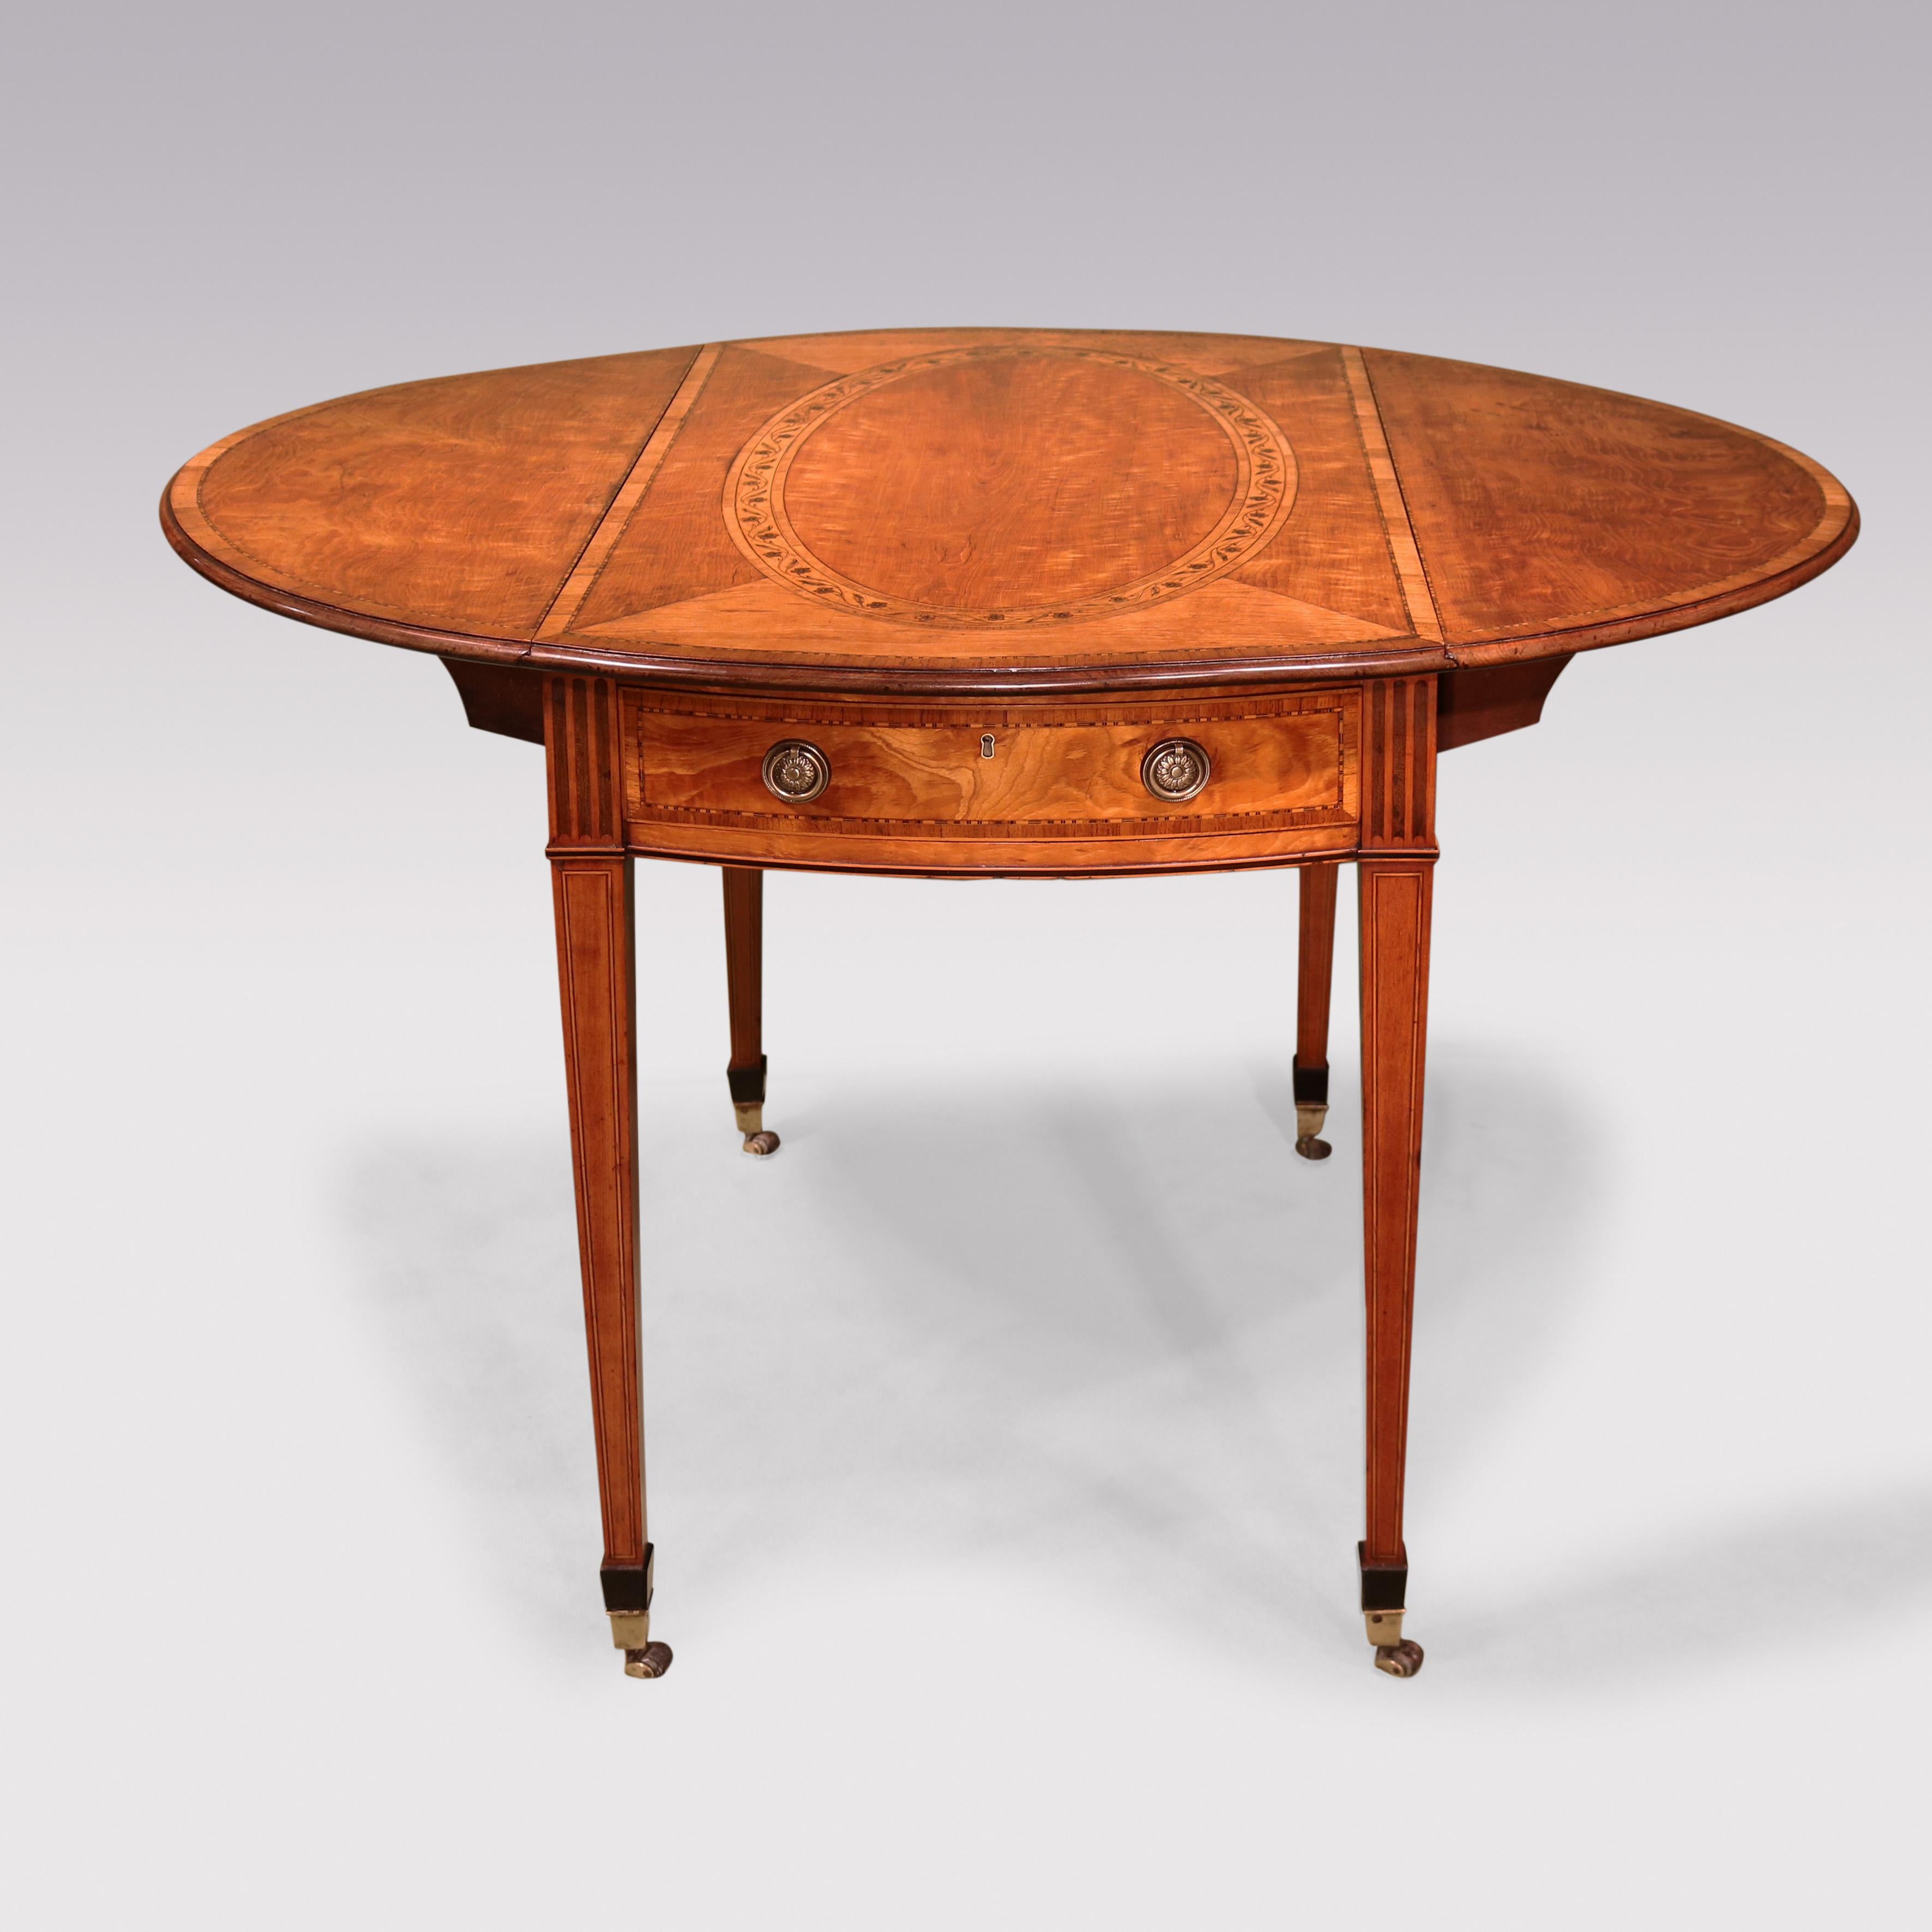 A fine late 18th Century shaped satinwood Pembroke Table boxwood and ebony strung throughout, having tulipwood crossbanded & mahogany moulded edged oval top, with parquetry stringing and mitred centre section having oval panel with flower & leaf